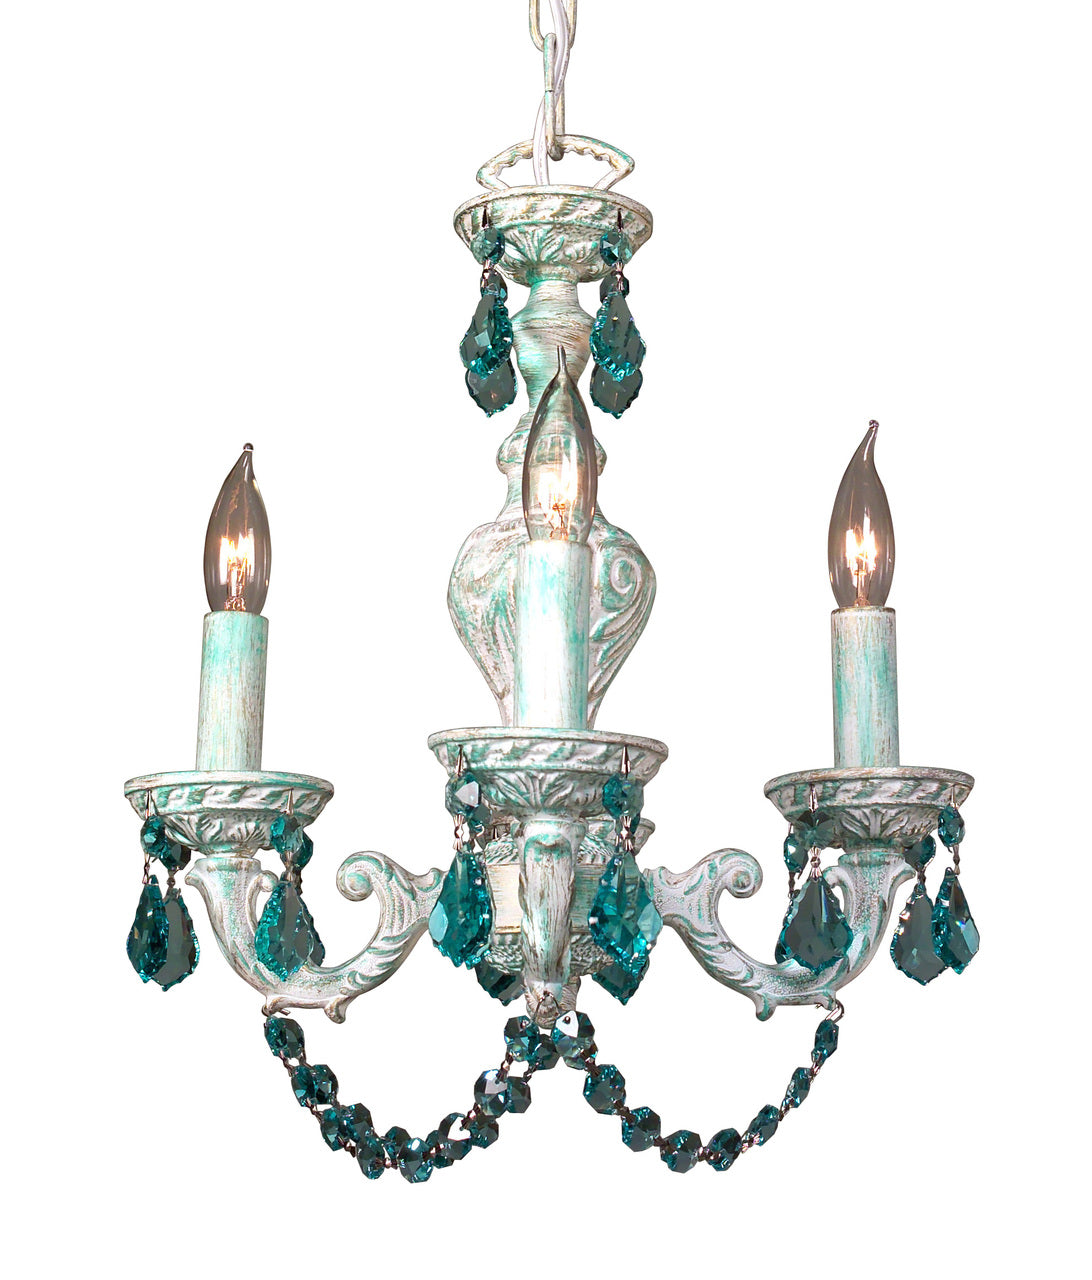 Classic Lighting 8335 GRN AG Gabrielle Crystal Mini Chandelier in Green/Antique White